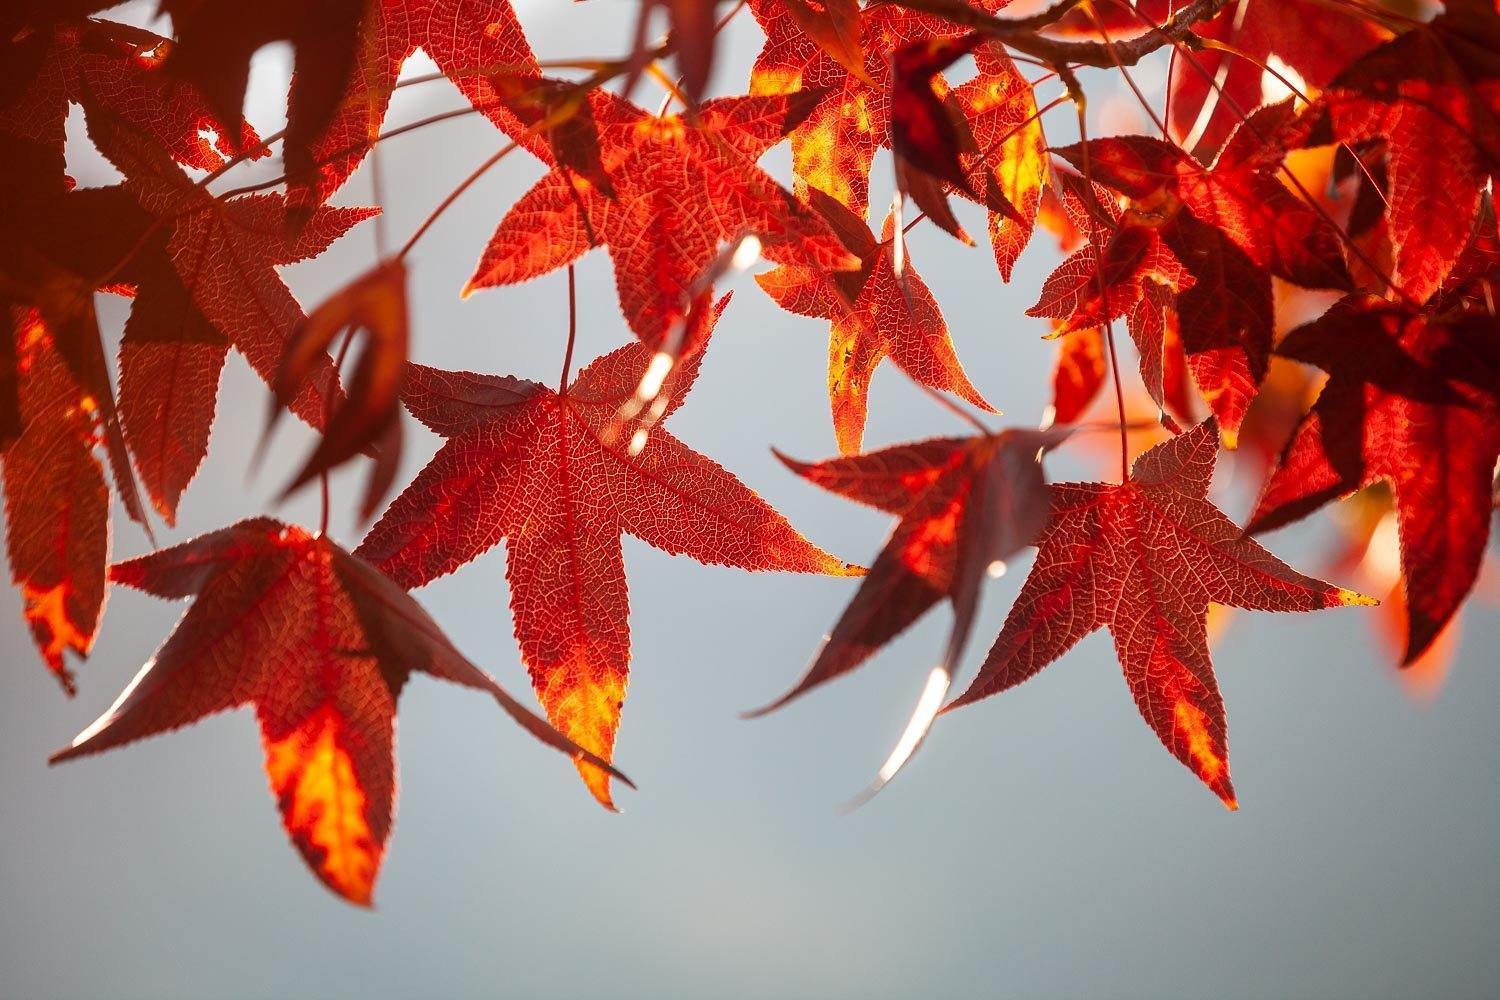 A group of star-shaped autumn leaves with orange and red-colored shades, Autumn Fire - Bright Victoria